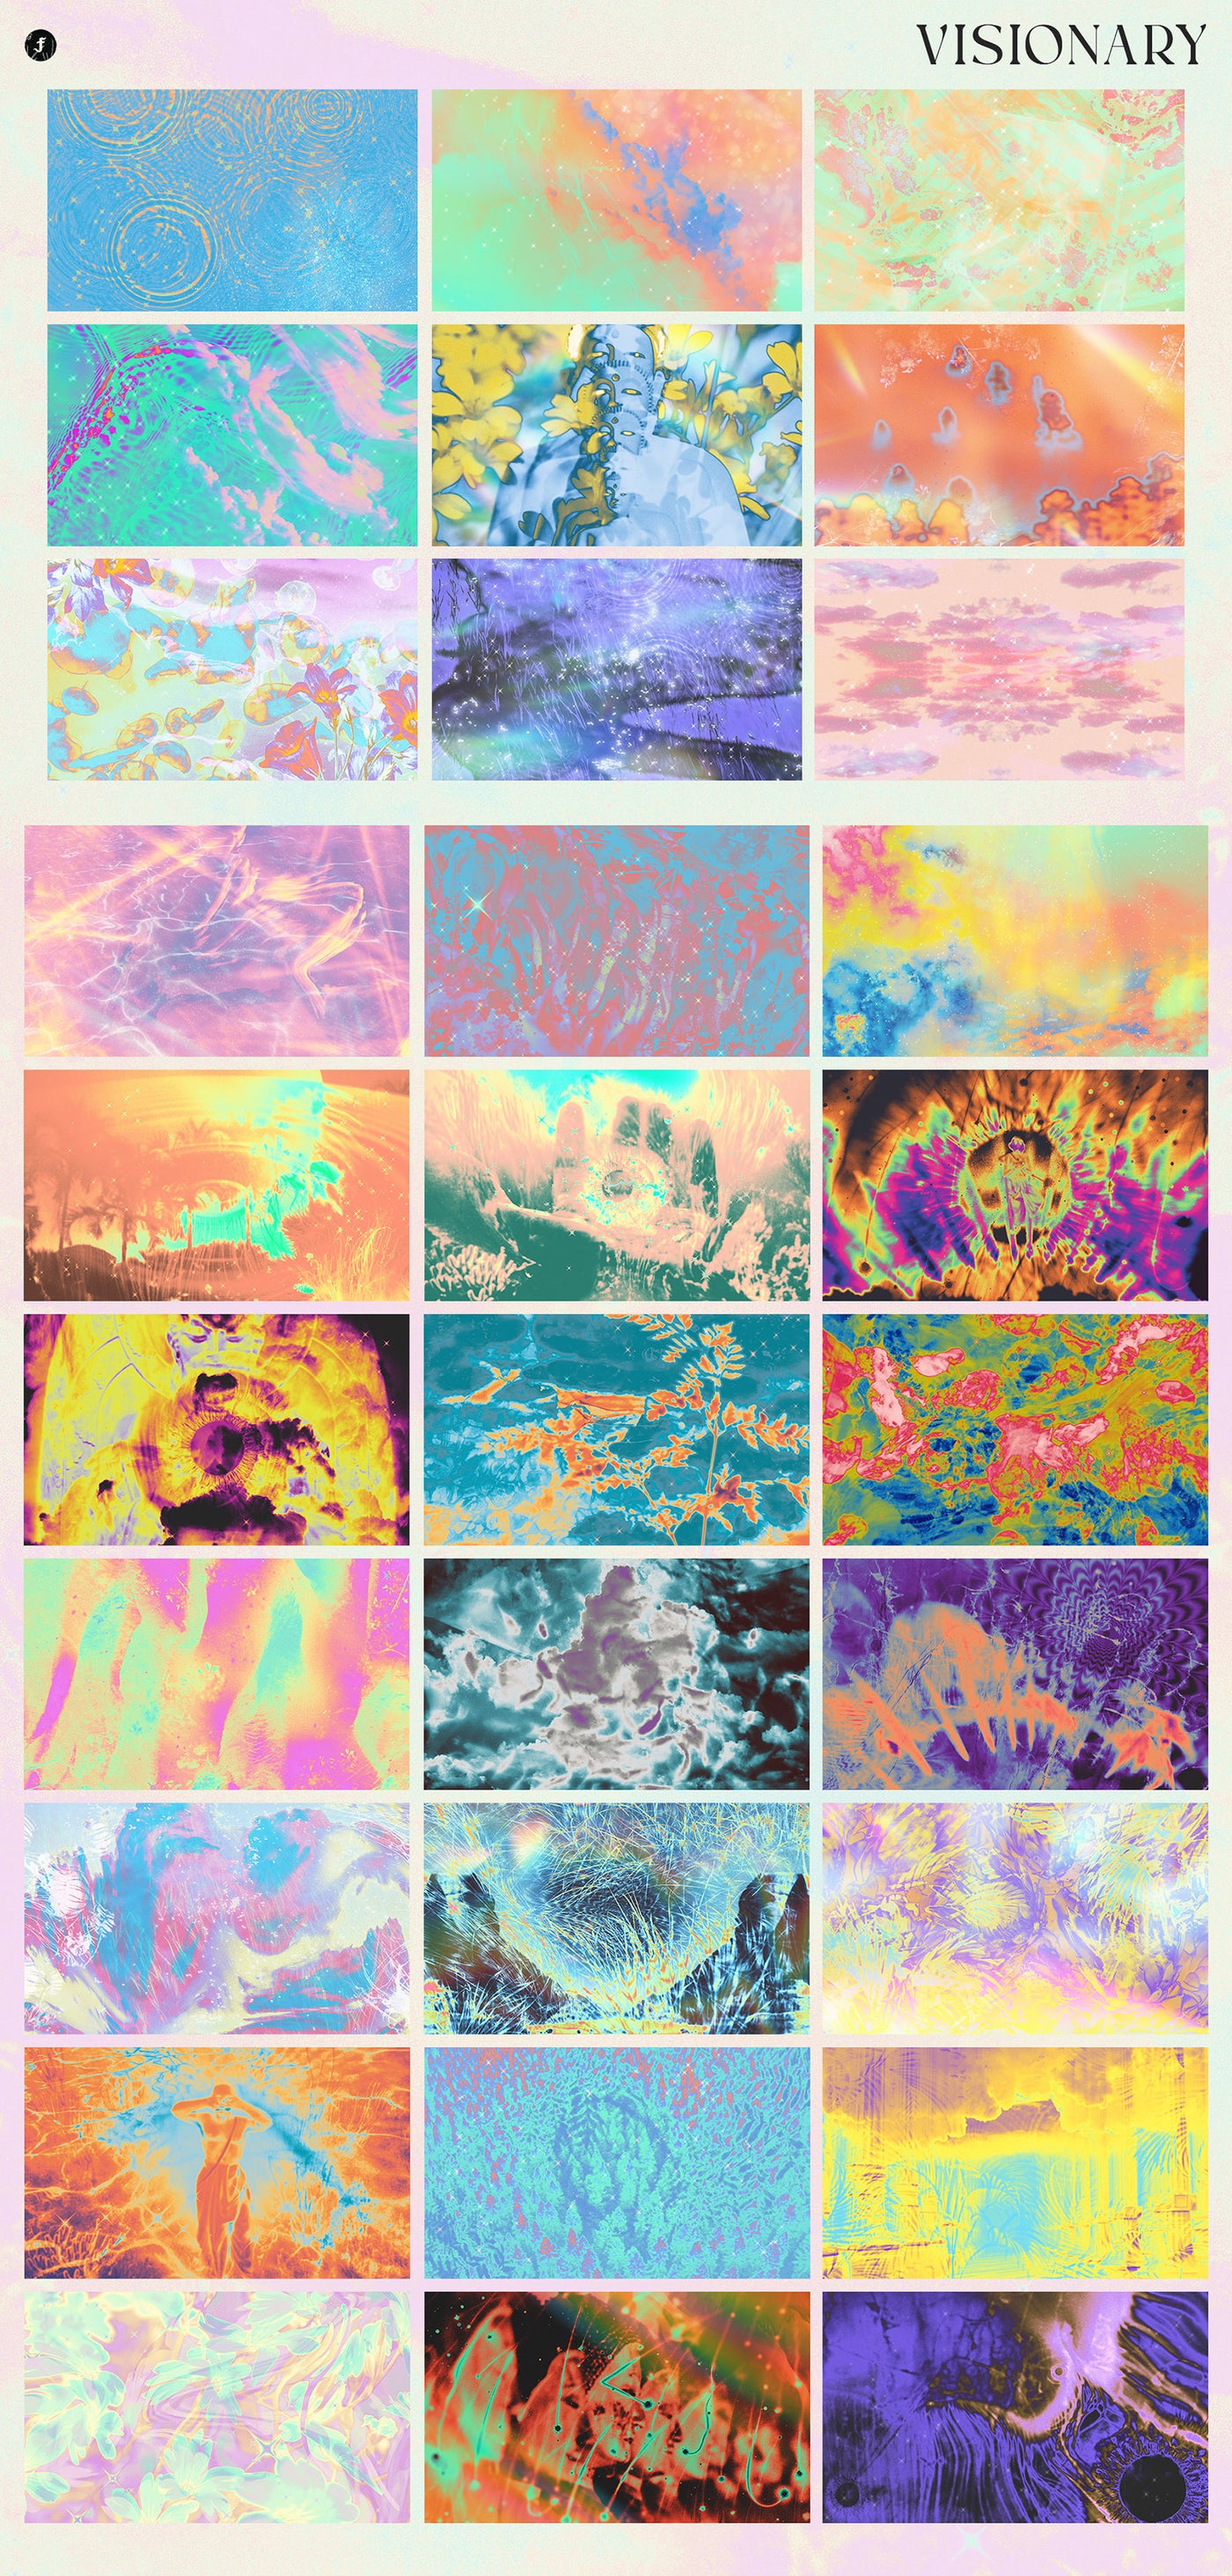 The 640 Psychedelic Graphics Bundle